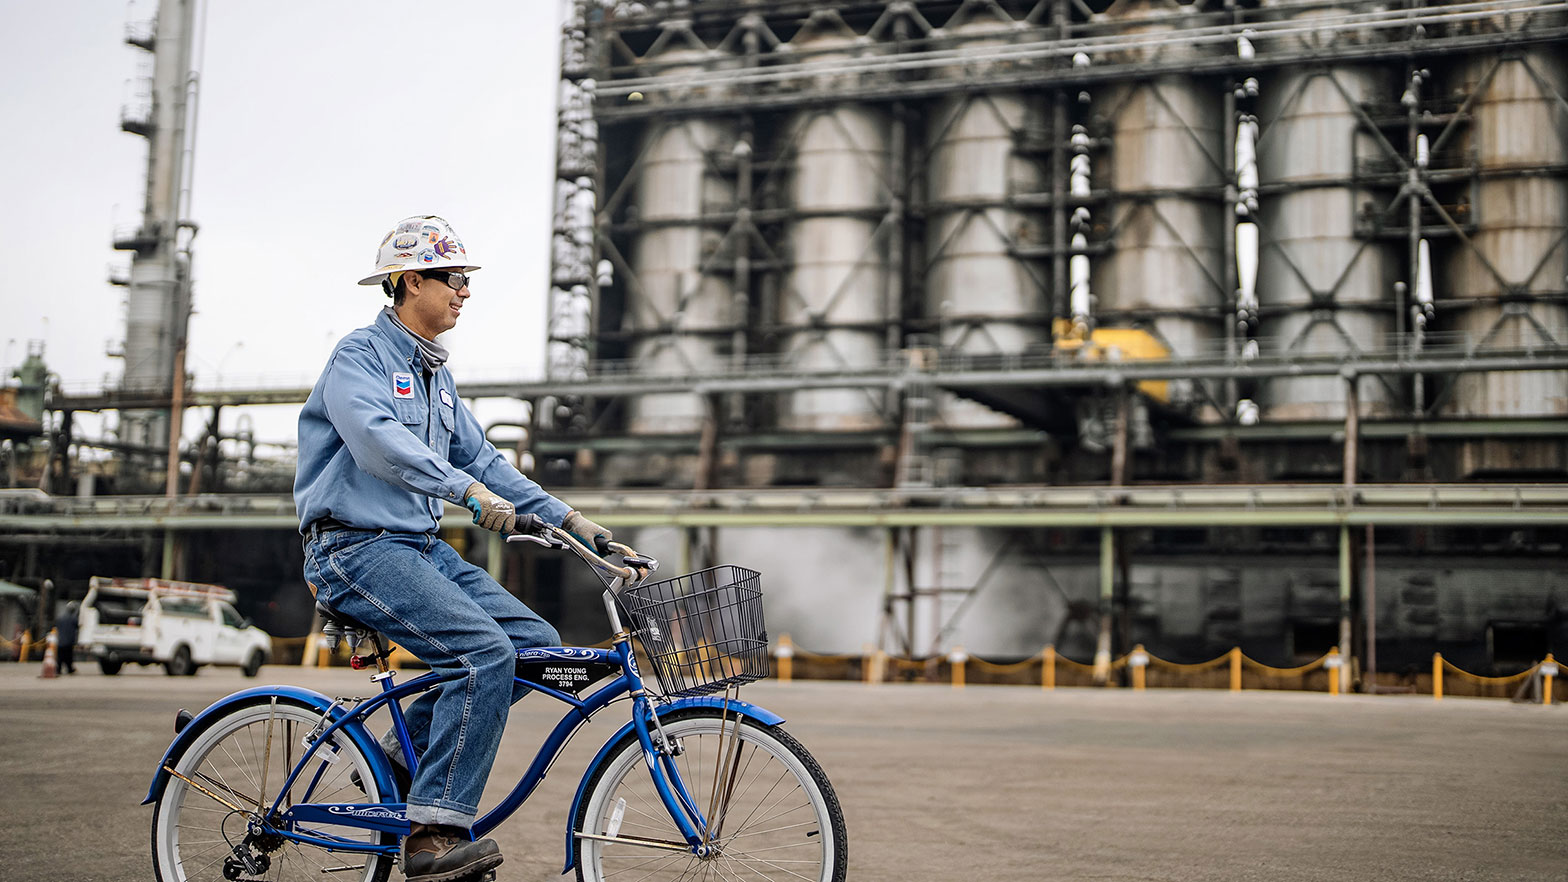 Trucks aren’t the only mode of transportation at the El Segundo, CA, refinery, as the smiling worker above demonstrates.